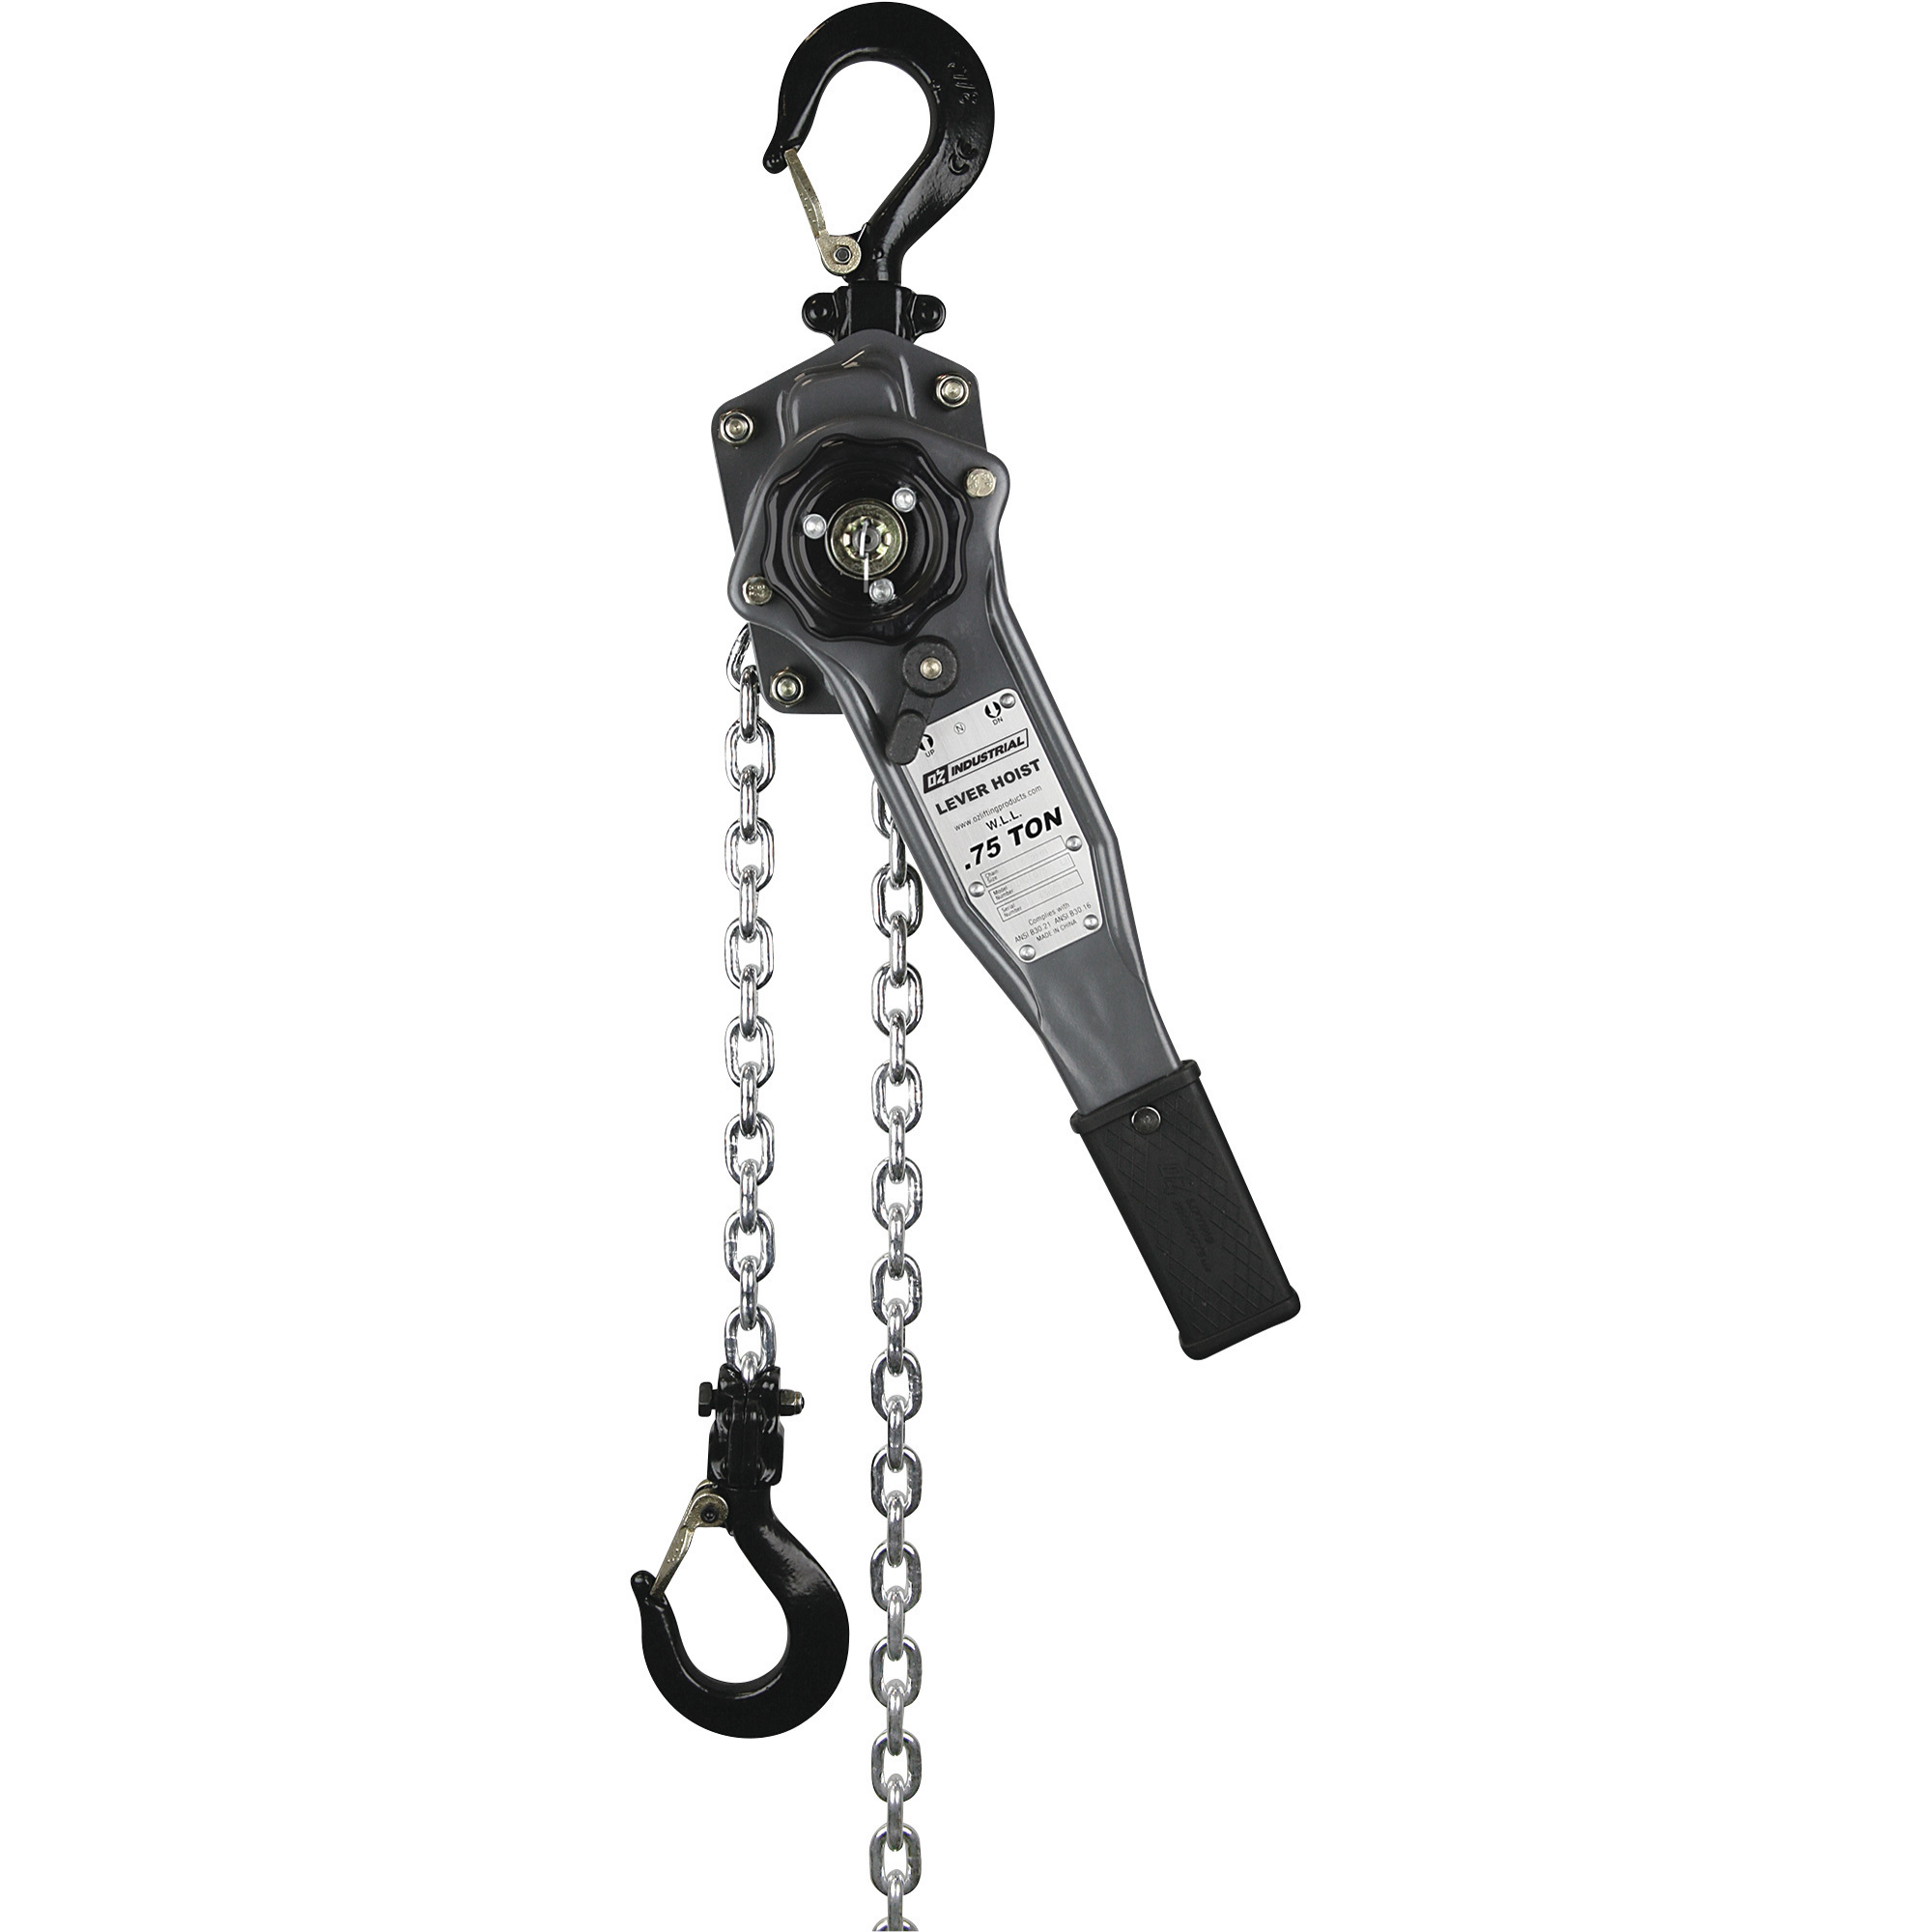 OZ Lifting Products Industrial Series Manual Lever Hoist â 3/4-Ton Capacity, 10ft. Lift, Model OZIND075-10LH